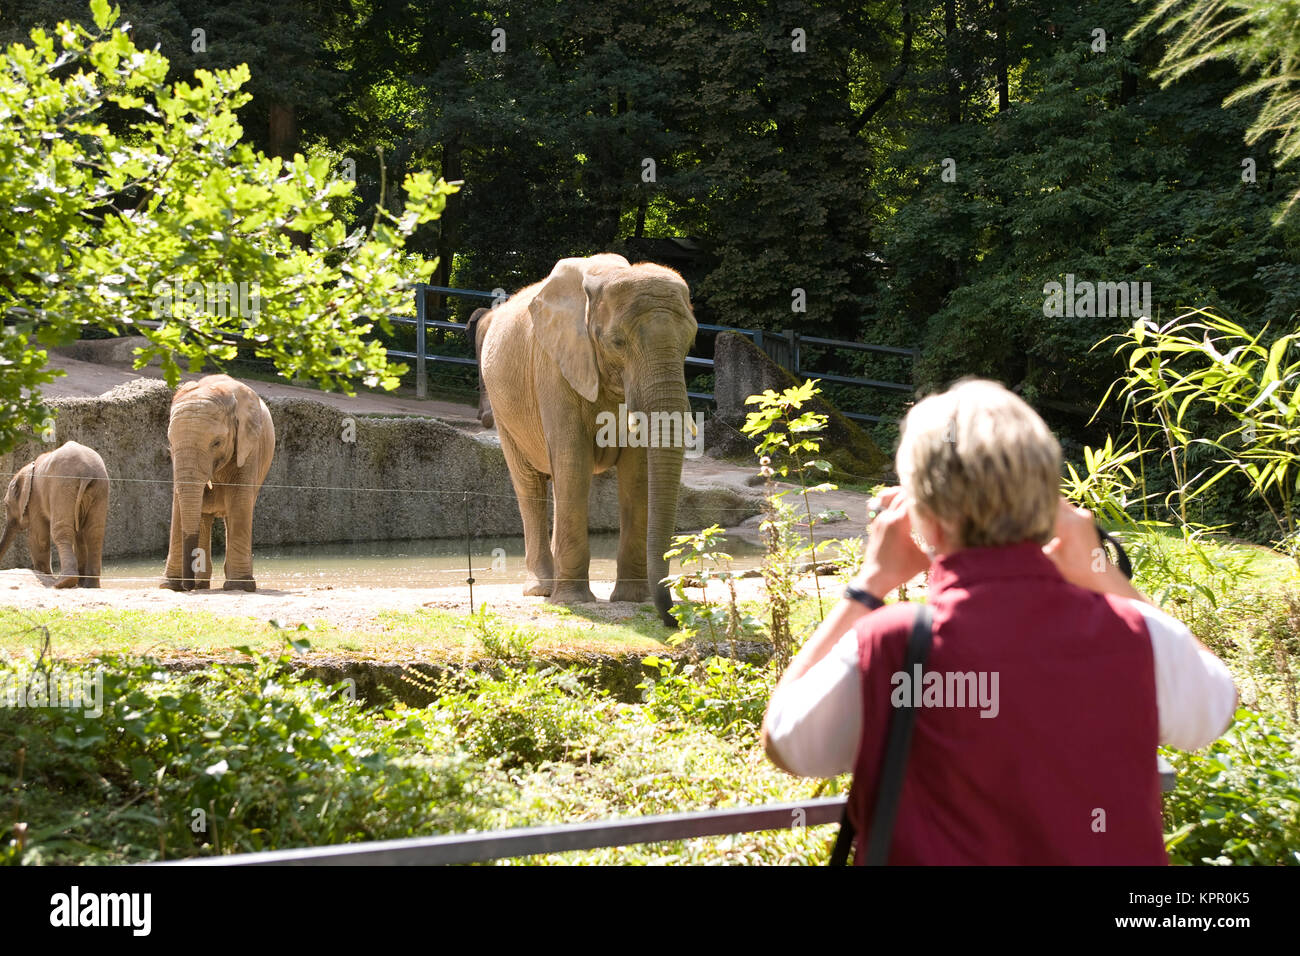 Zoo Wuppertal High Resolution Stock Photography and Images - Alamy